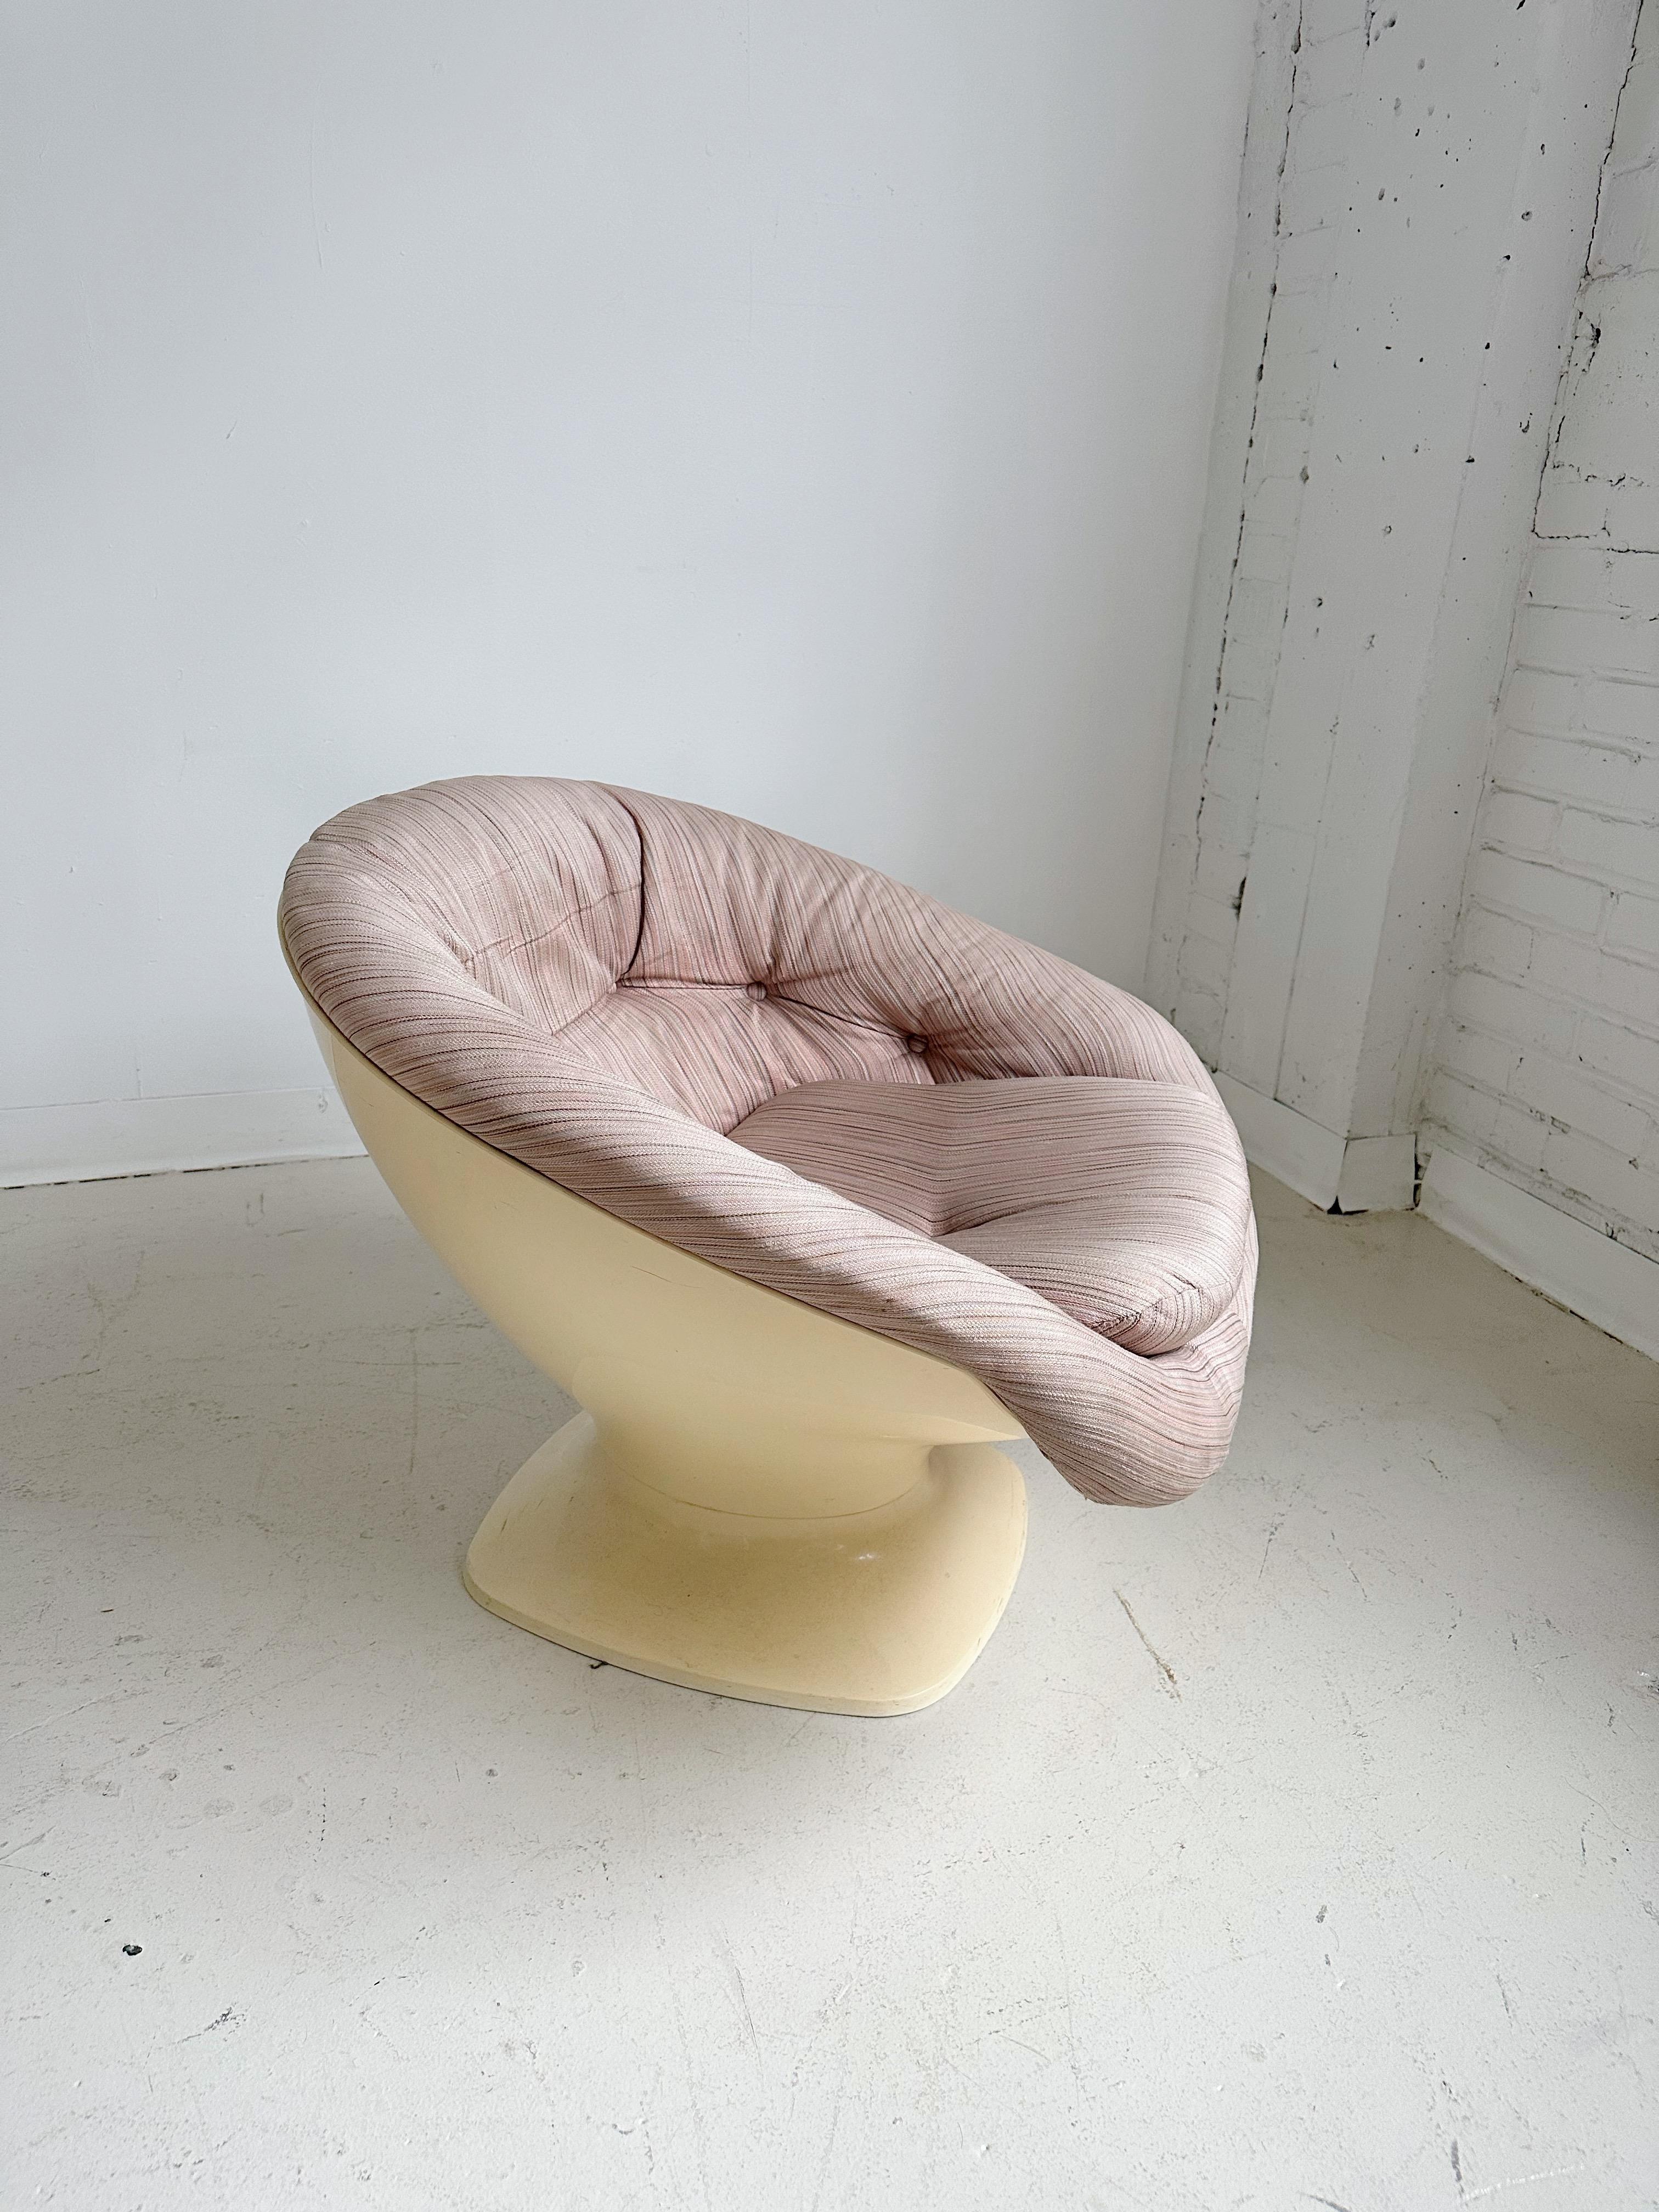 Space Age Club Chair by Raphael Raffel, 60's

Features a fibreglass tulip shape frame and light pink striped fabric 

//

Dimensions:

29”W x 28”D x 24”H  - seat height 14